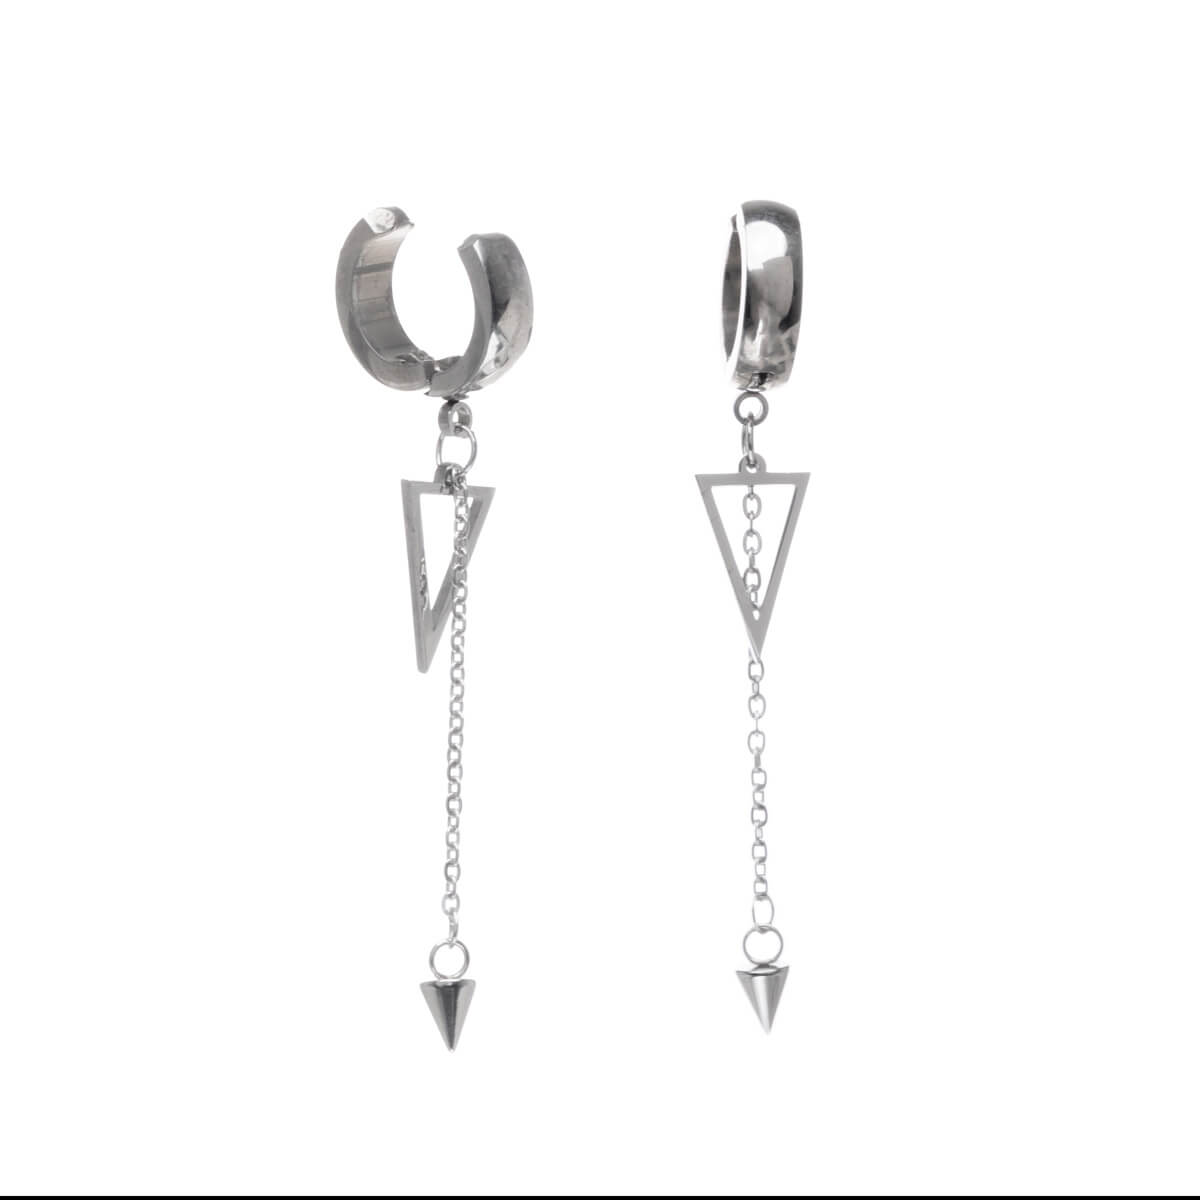 Cone pendant with chain ring clip earrings (Steel 316L)